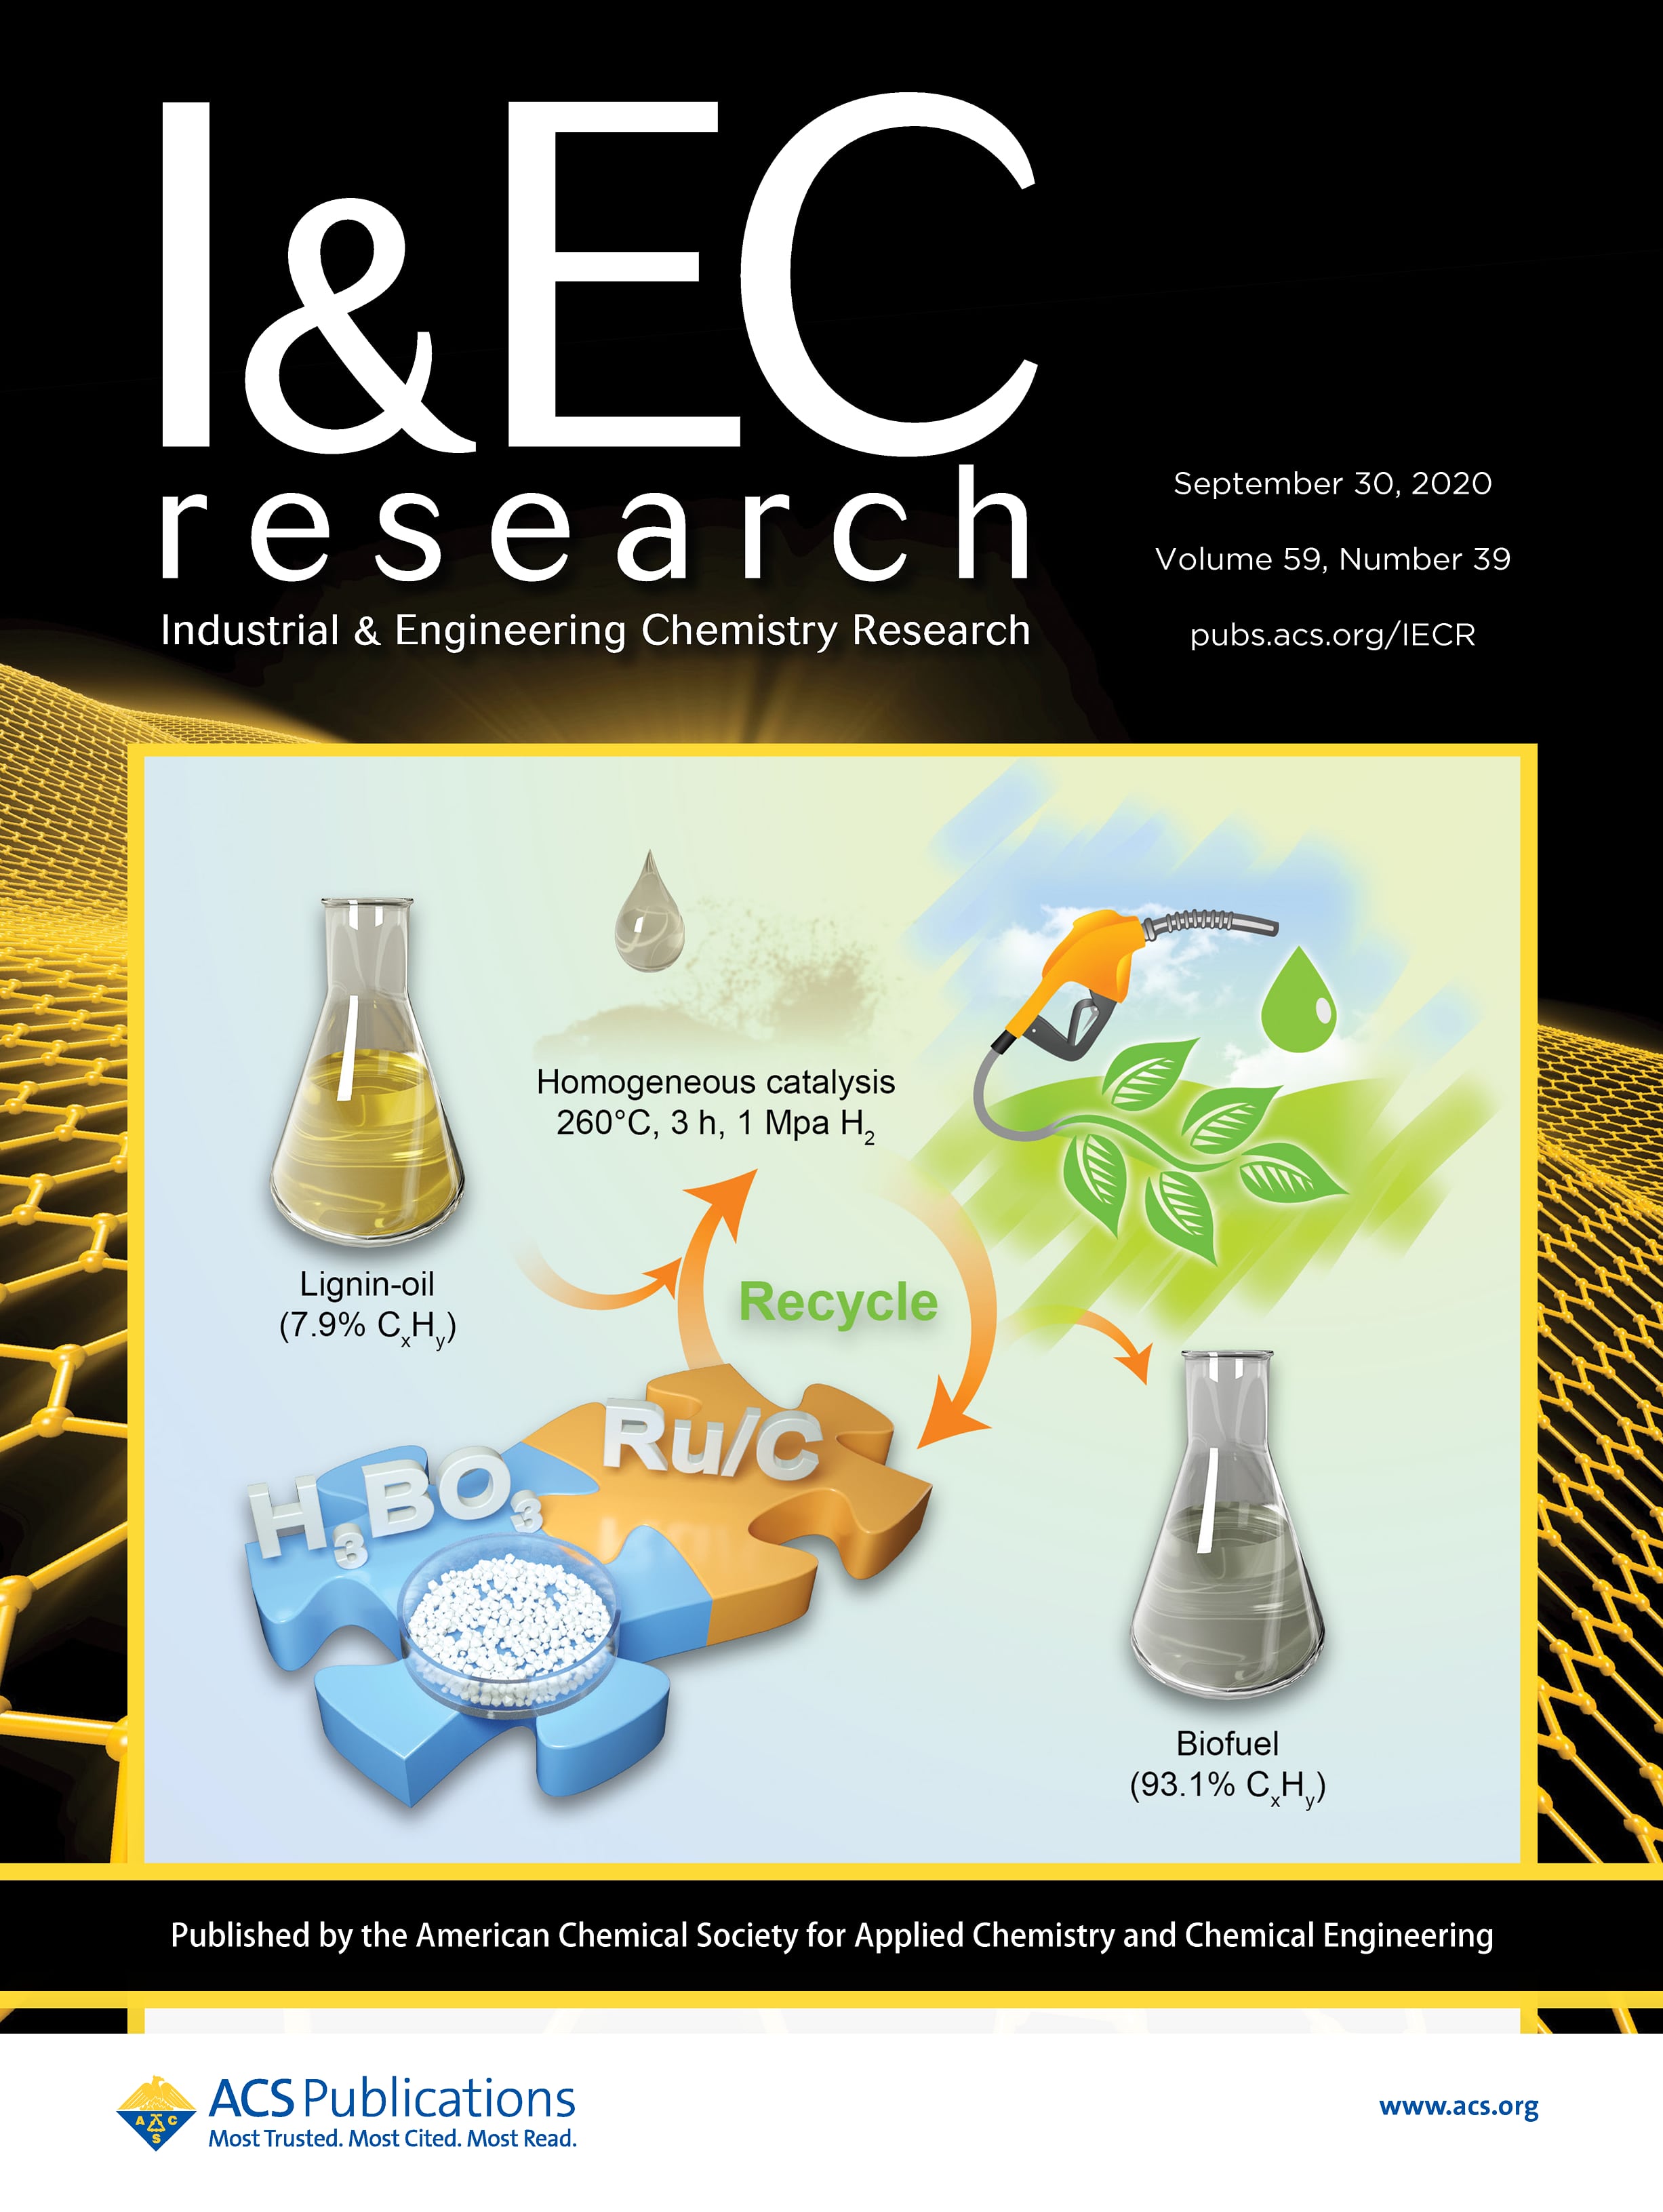 LetPub Journal Cover Art Design - Boric Acid as a Novel Homogeneous Catalyst Coupled with Ru/C for Hydrodeoxygenation of Phenolic Compounds and Raw Lignin Oil